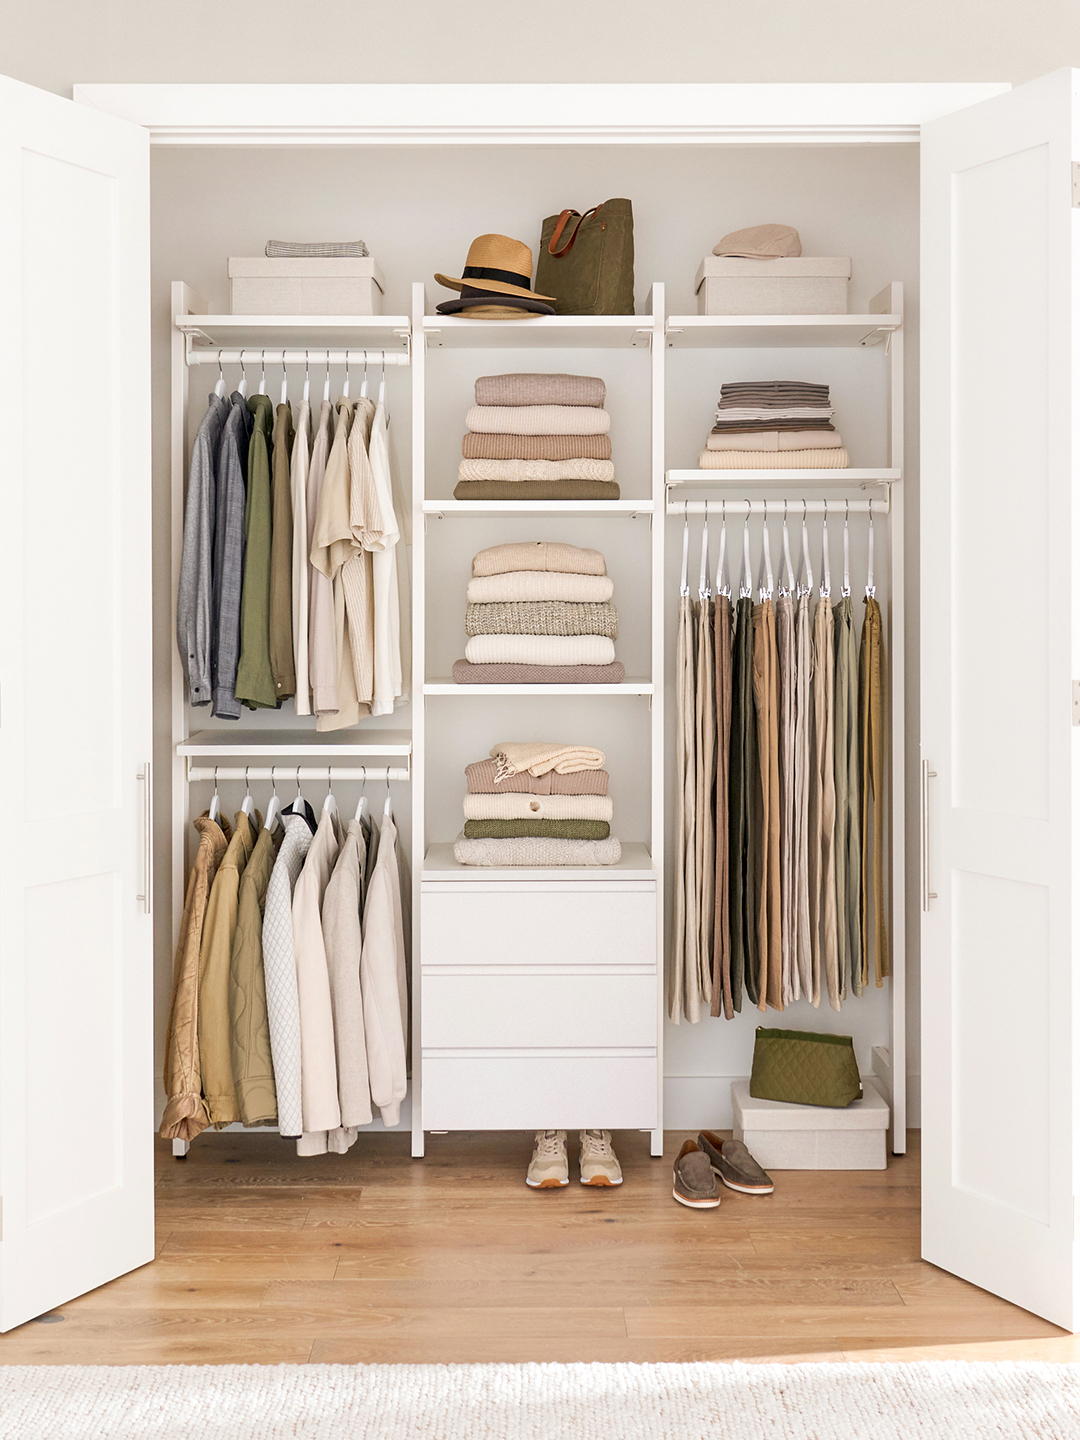 https://www.domino.com/uploads/2023/04/12/00-FEATURE-Pottery-Barn-Hold-Everything-Closet-Review-domino.jpg?auto=webp